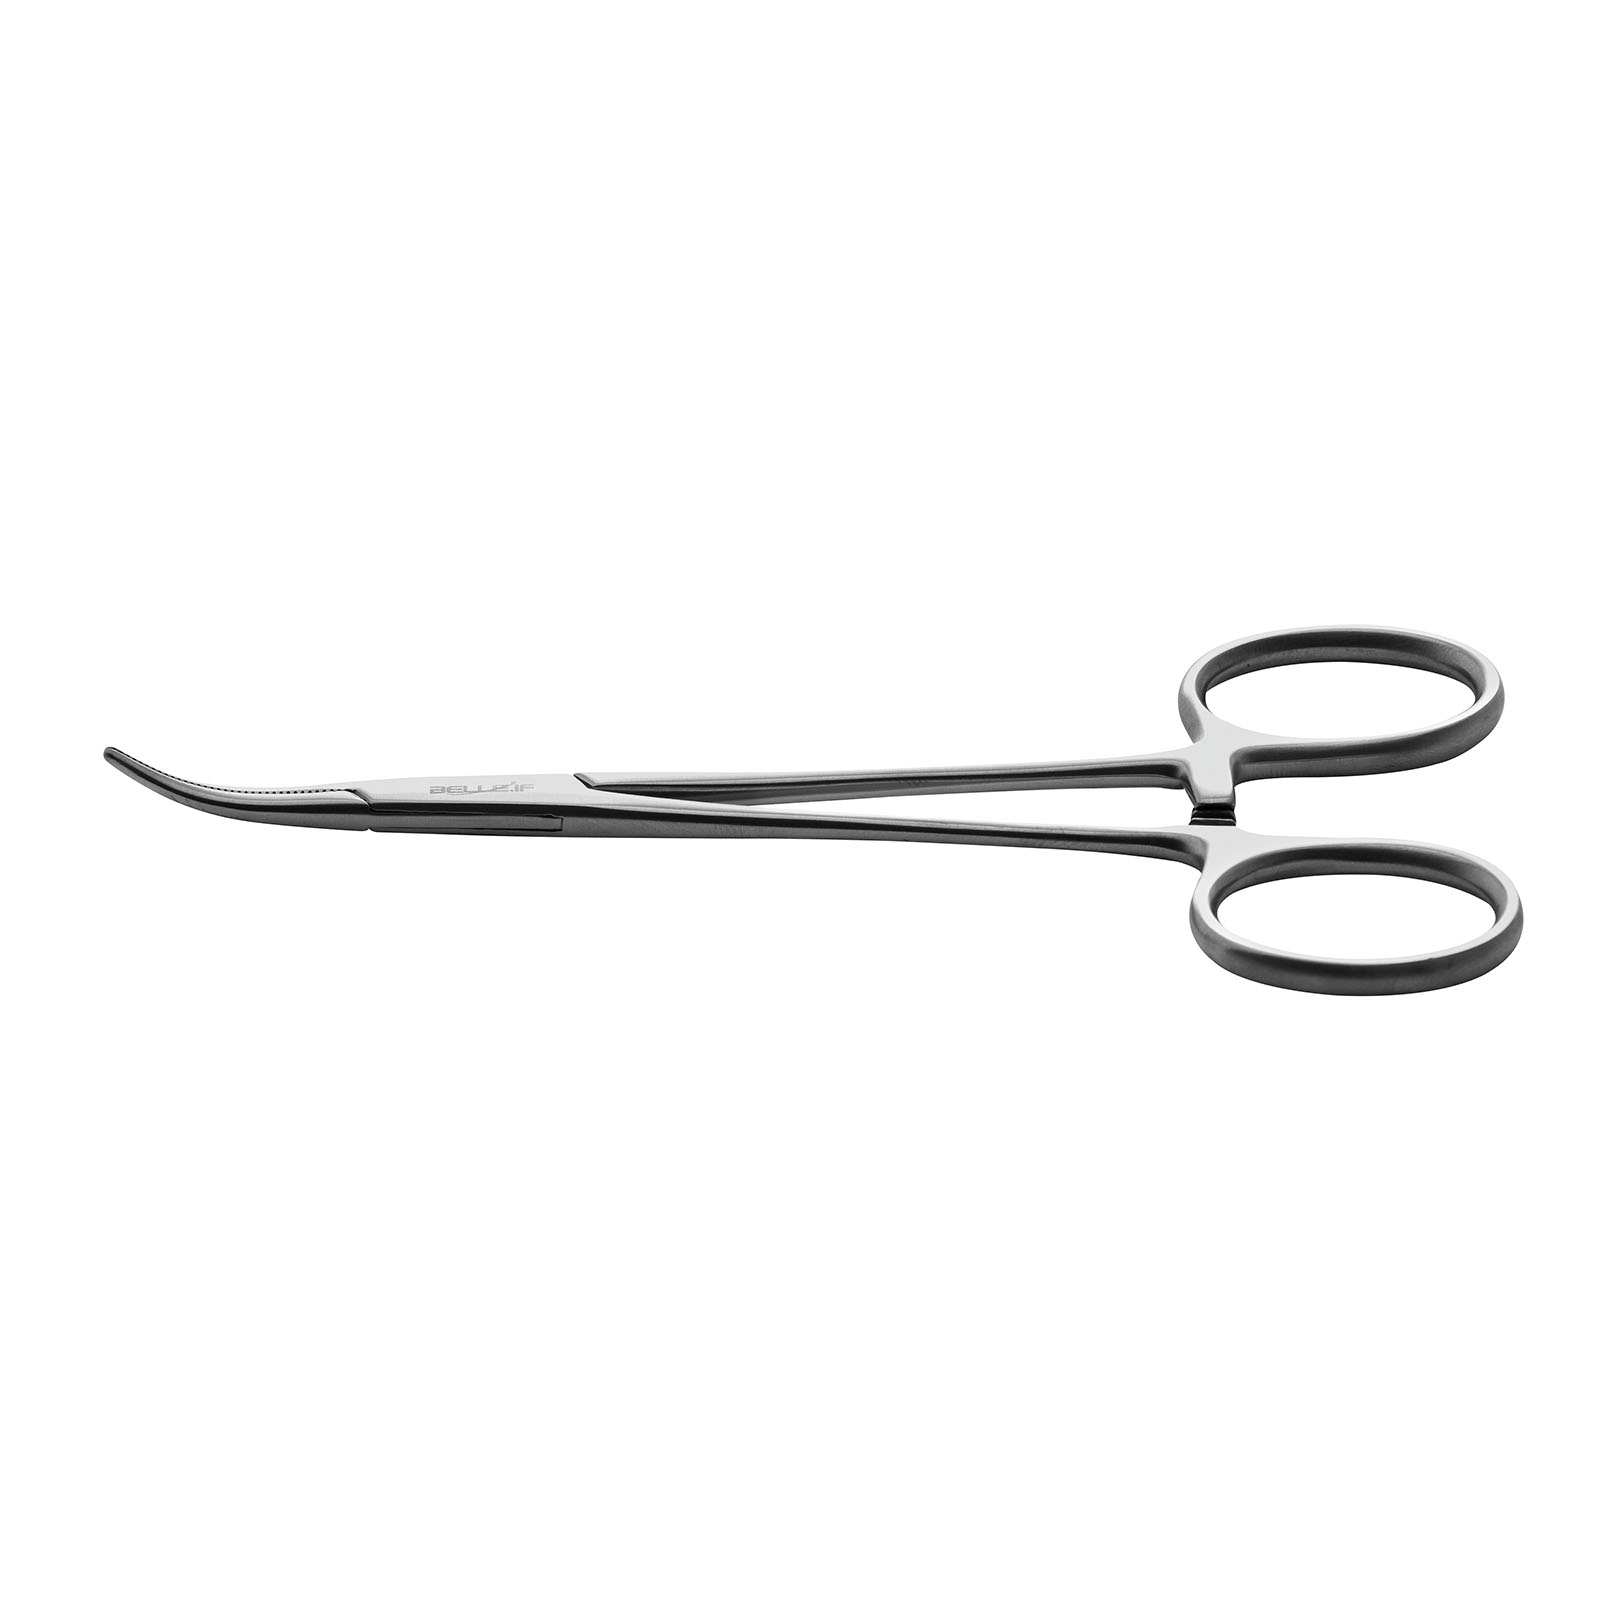 IF-9101 Stainless Steel Needle Holder 